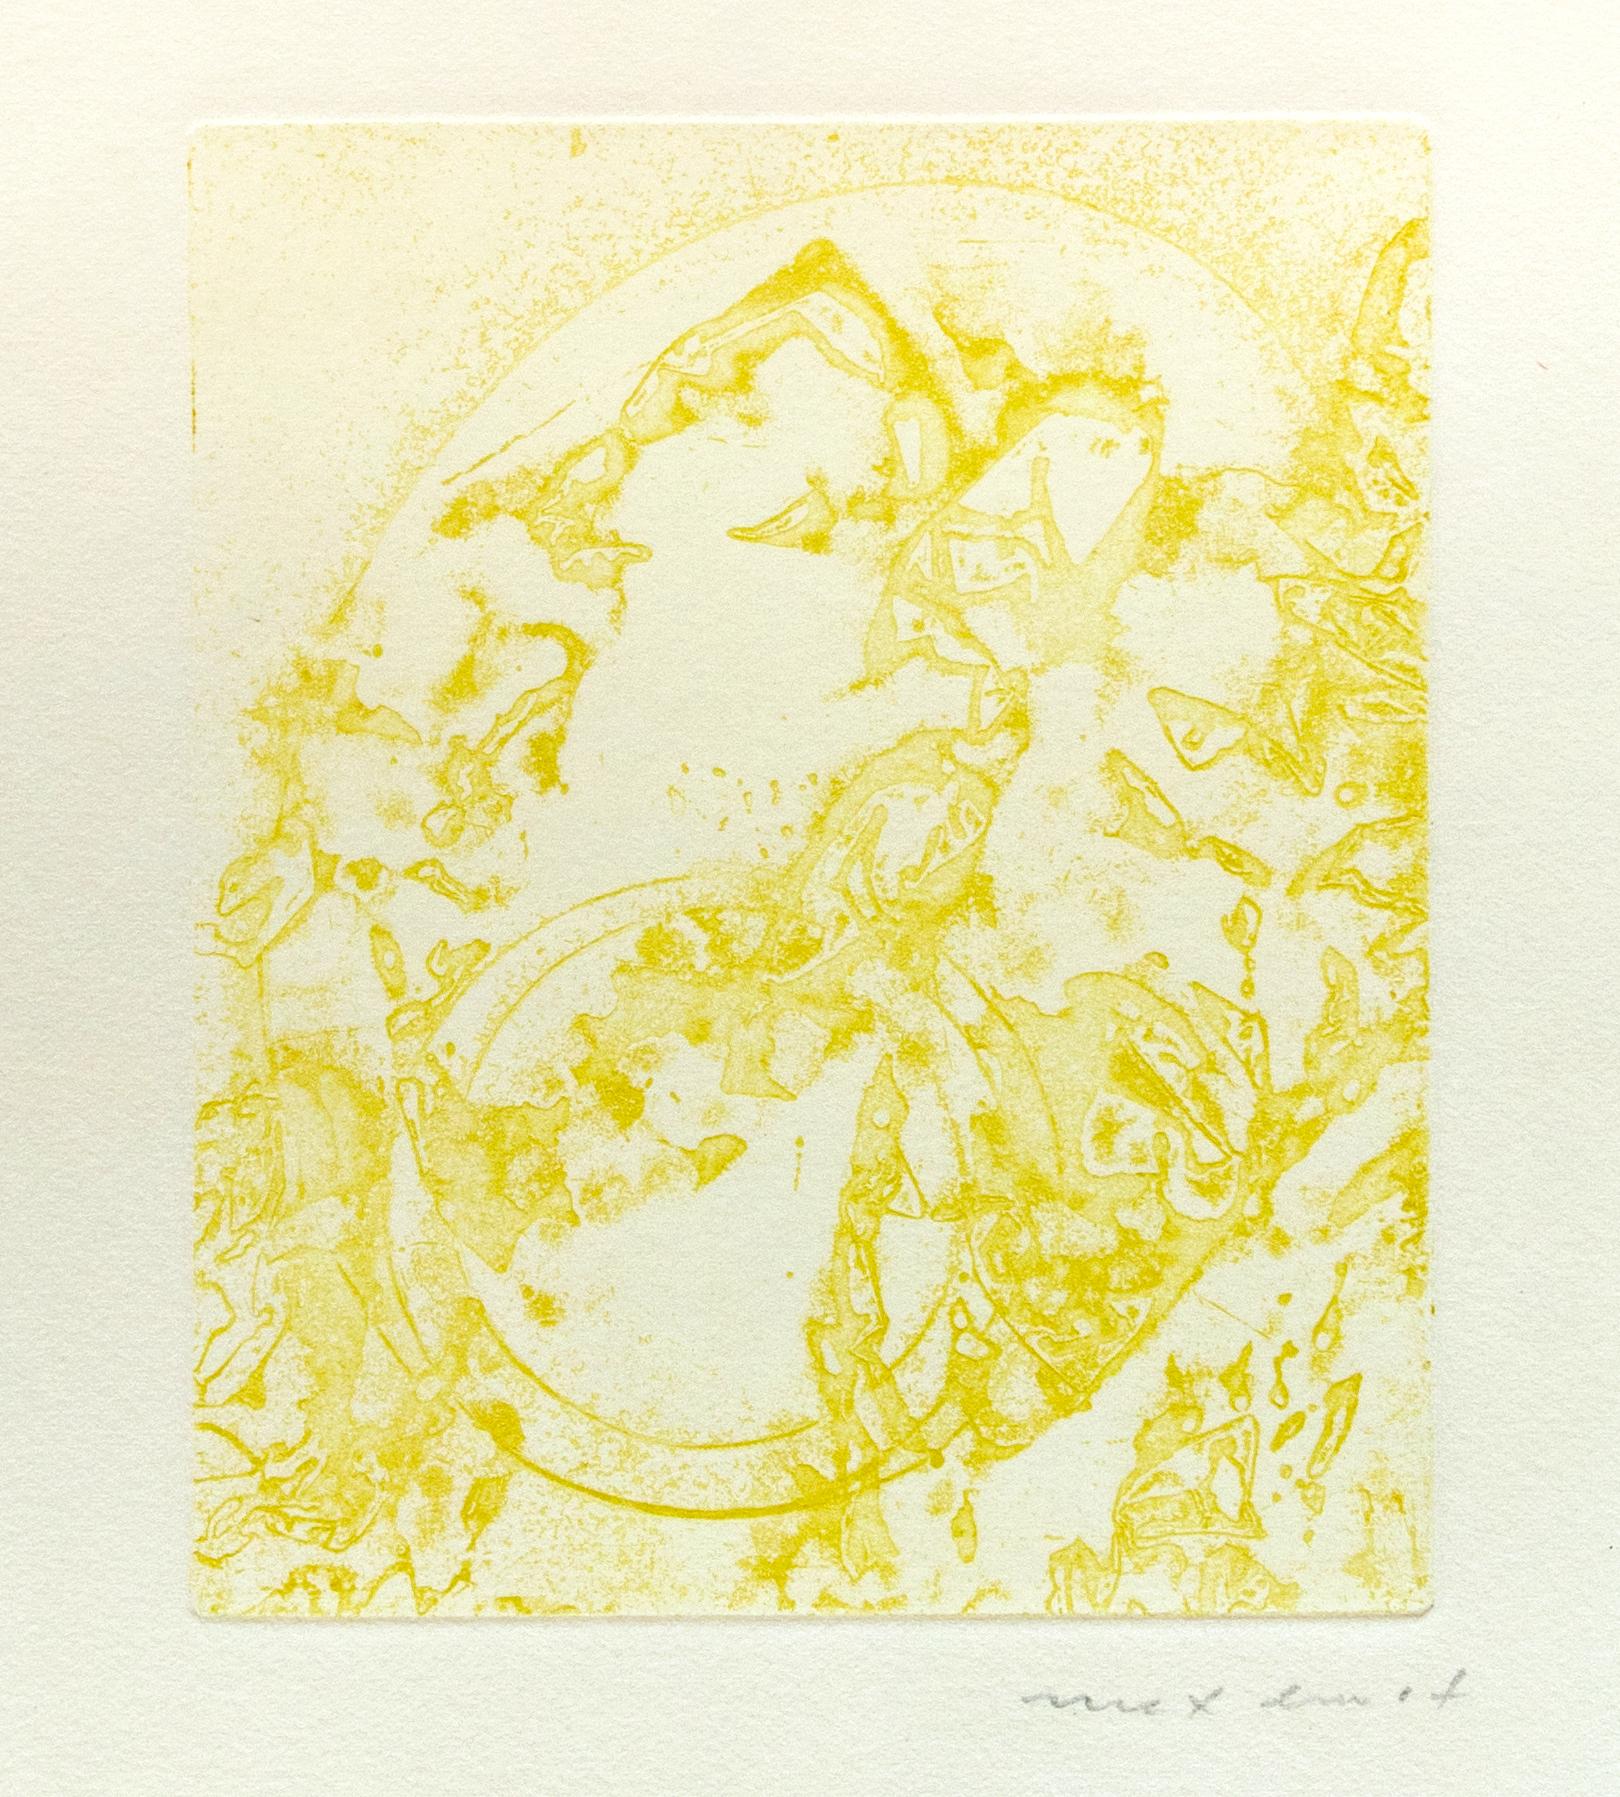 " Hölderlin: Poèmes " is a hand-signed etching realized by Max Ernst  in 1961. It presents very good conditions. Passepartout included: 49 x 34 cm.

Bibliography: Catalog Brusberg n. 86 BP.

Originally a Dada activist in Germany,  Max Ernst